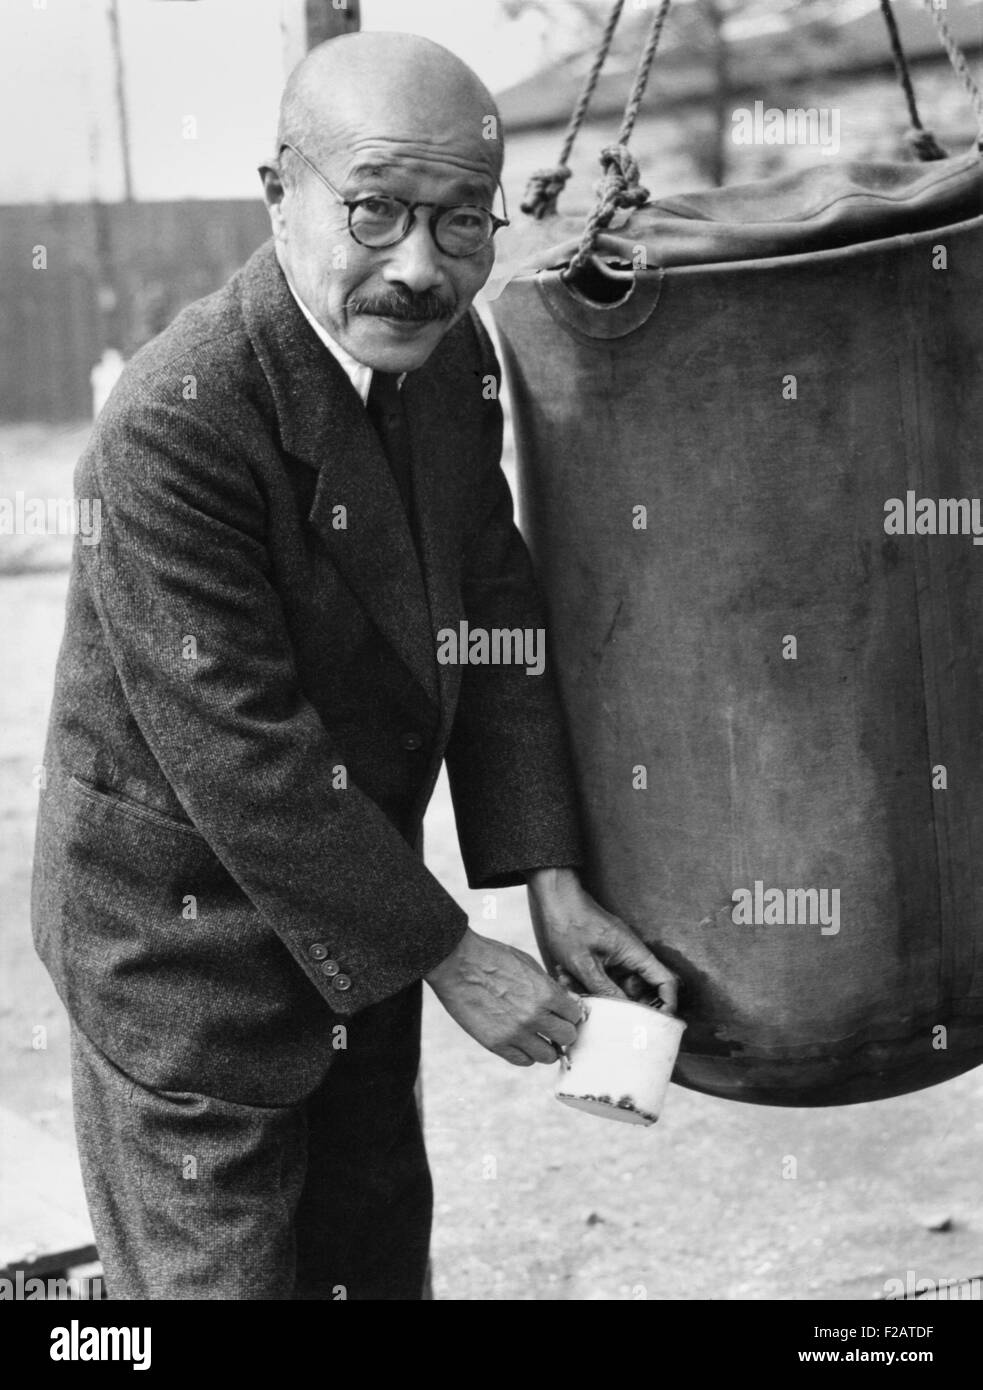 Japanese Ex-Premier Hideki Tojo, at Omori Prison Camp for suspected war criminals. Nov. 9, 1945. After Japan's defeat he shot himself, but received medical care and recovered. He is drawing water from a storage bag. (CSU 2015 11 1701) Stock Photo